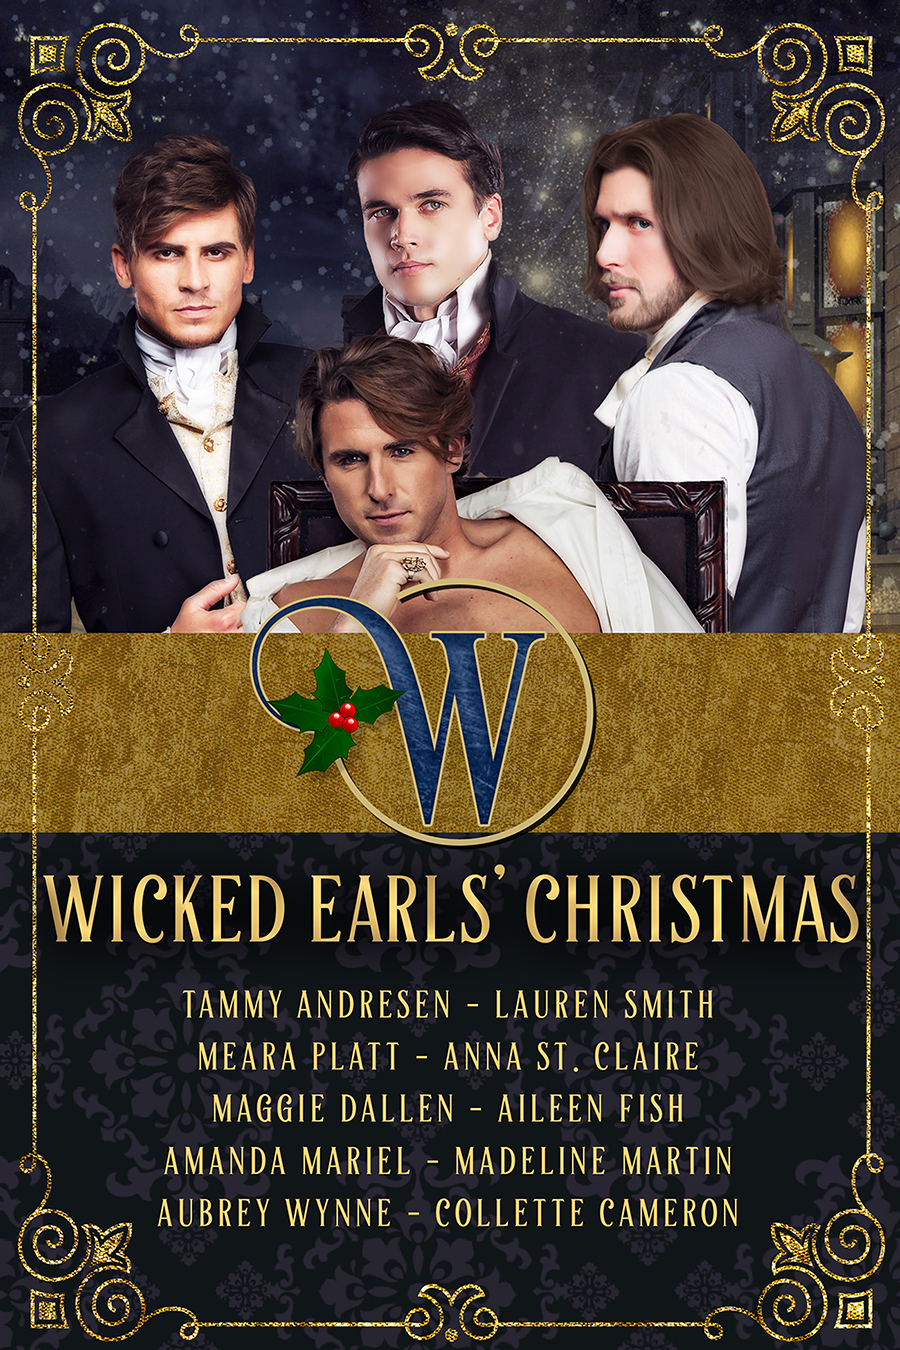 The Wicked Earls’ Christmas is out!